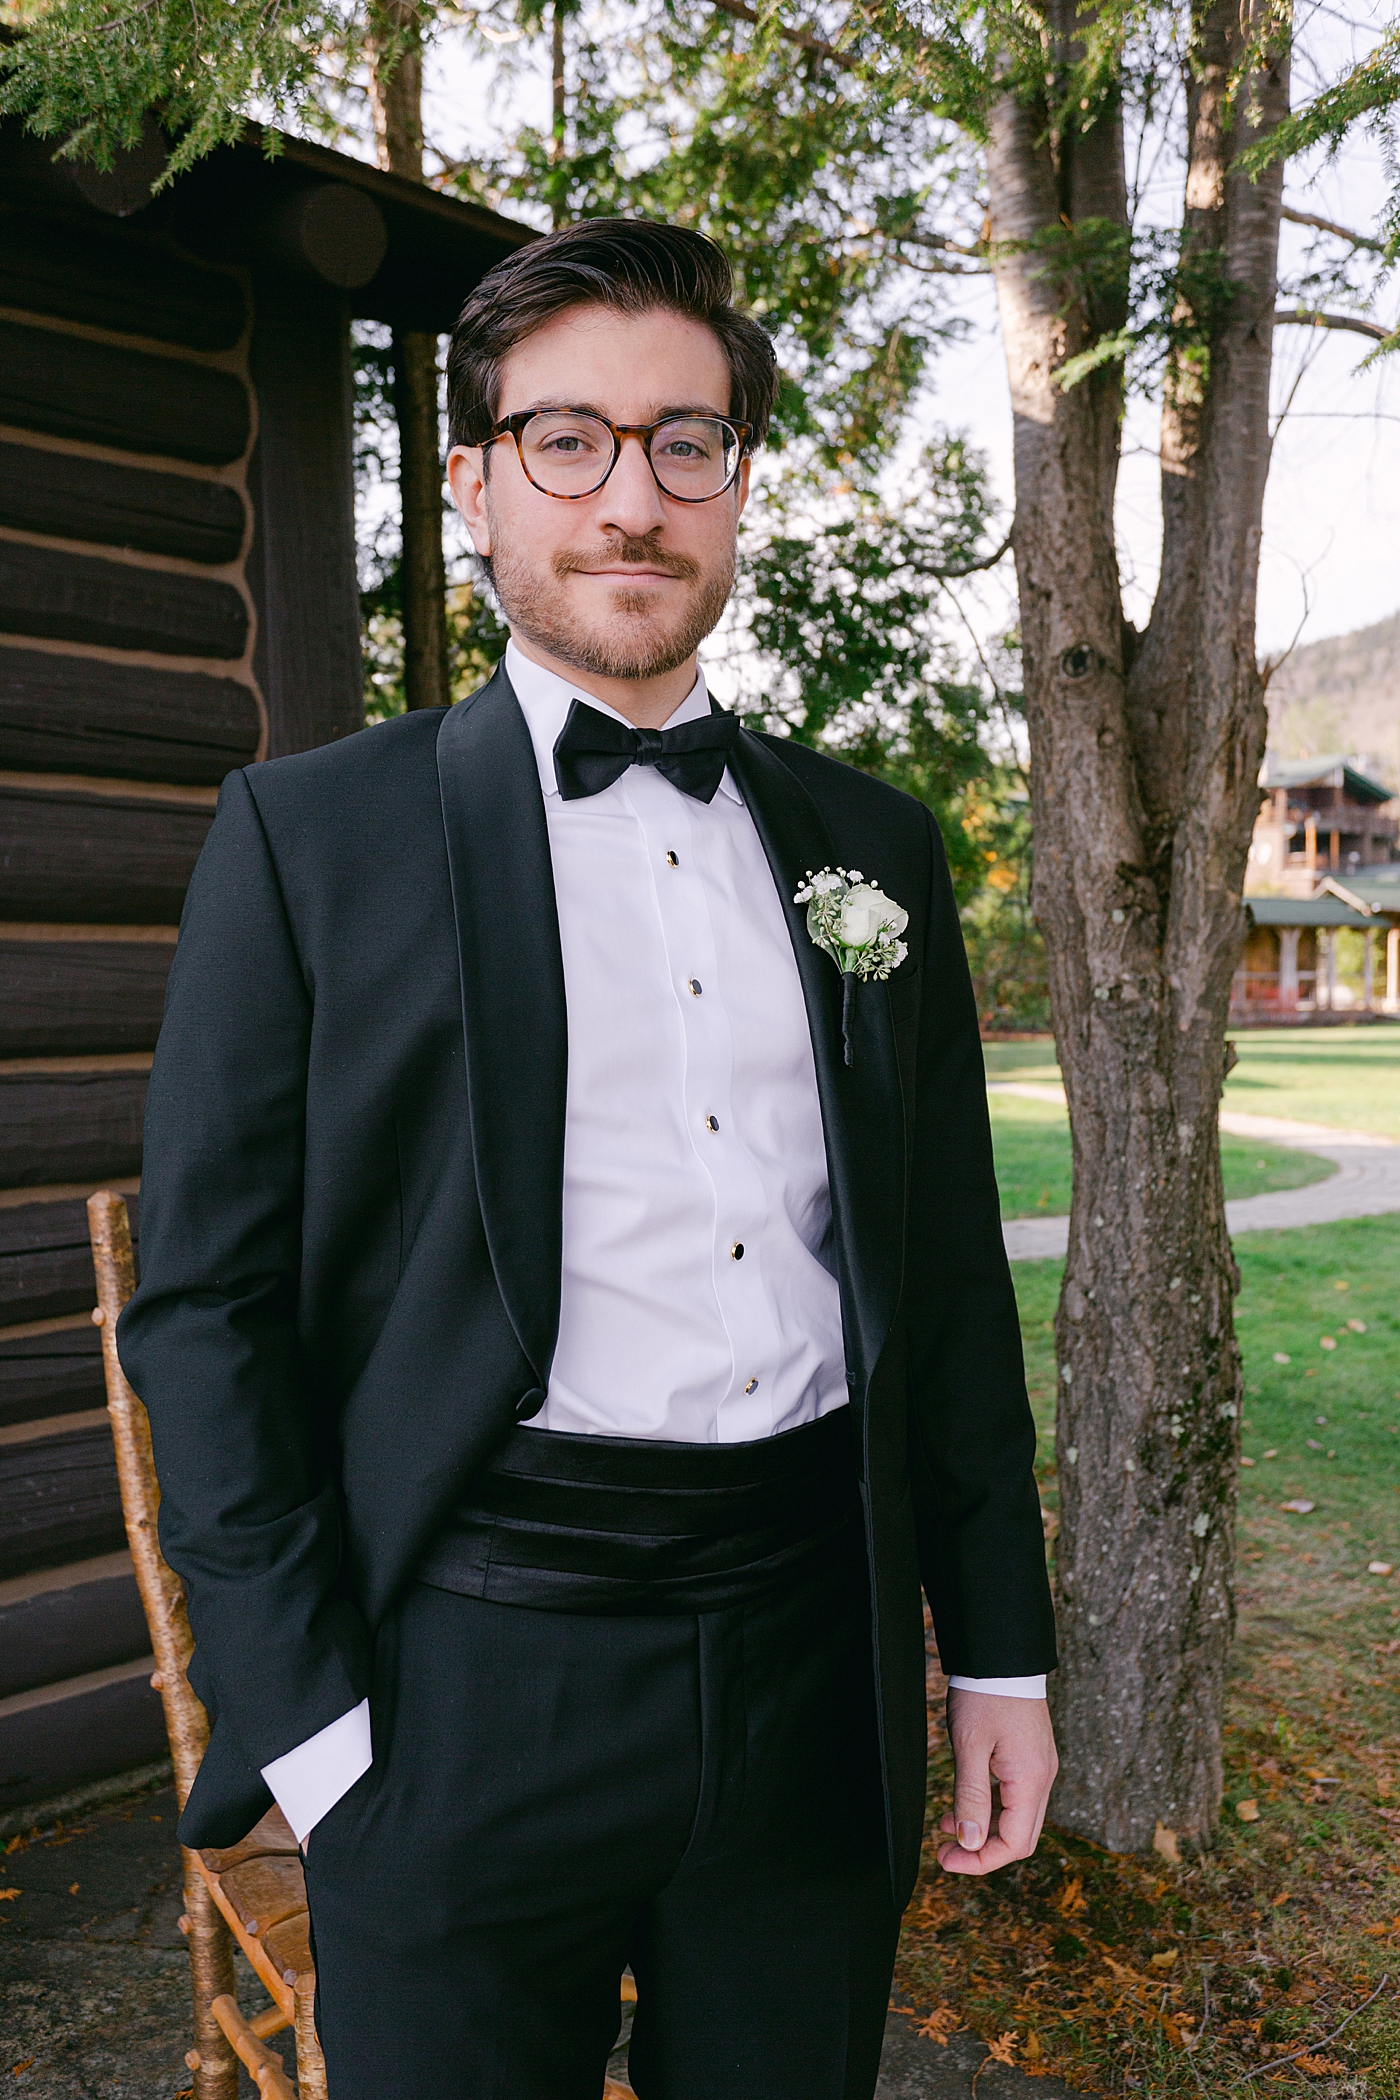 Groom portrait outside | Image by Hope Helmuth Photography